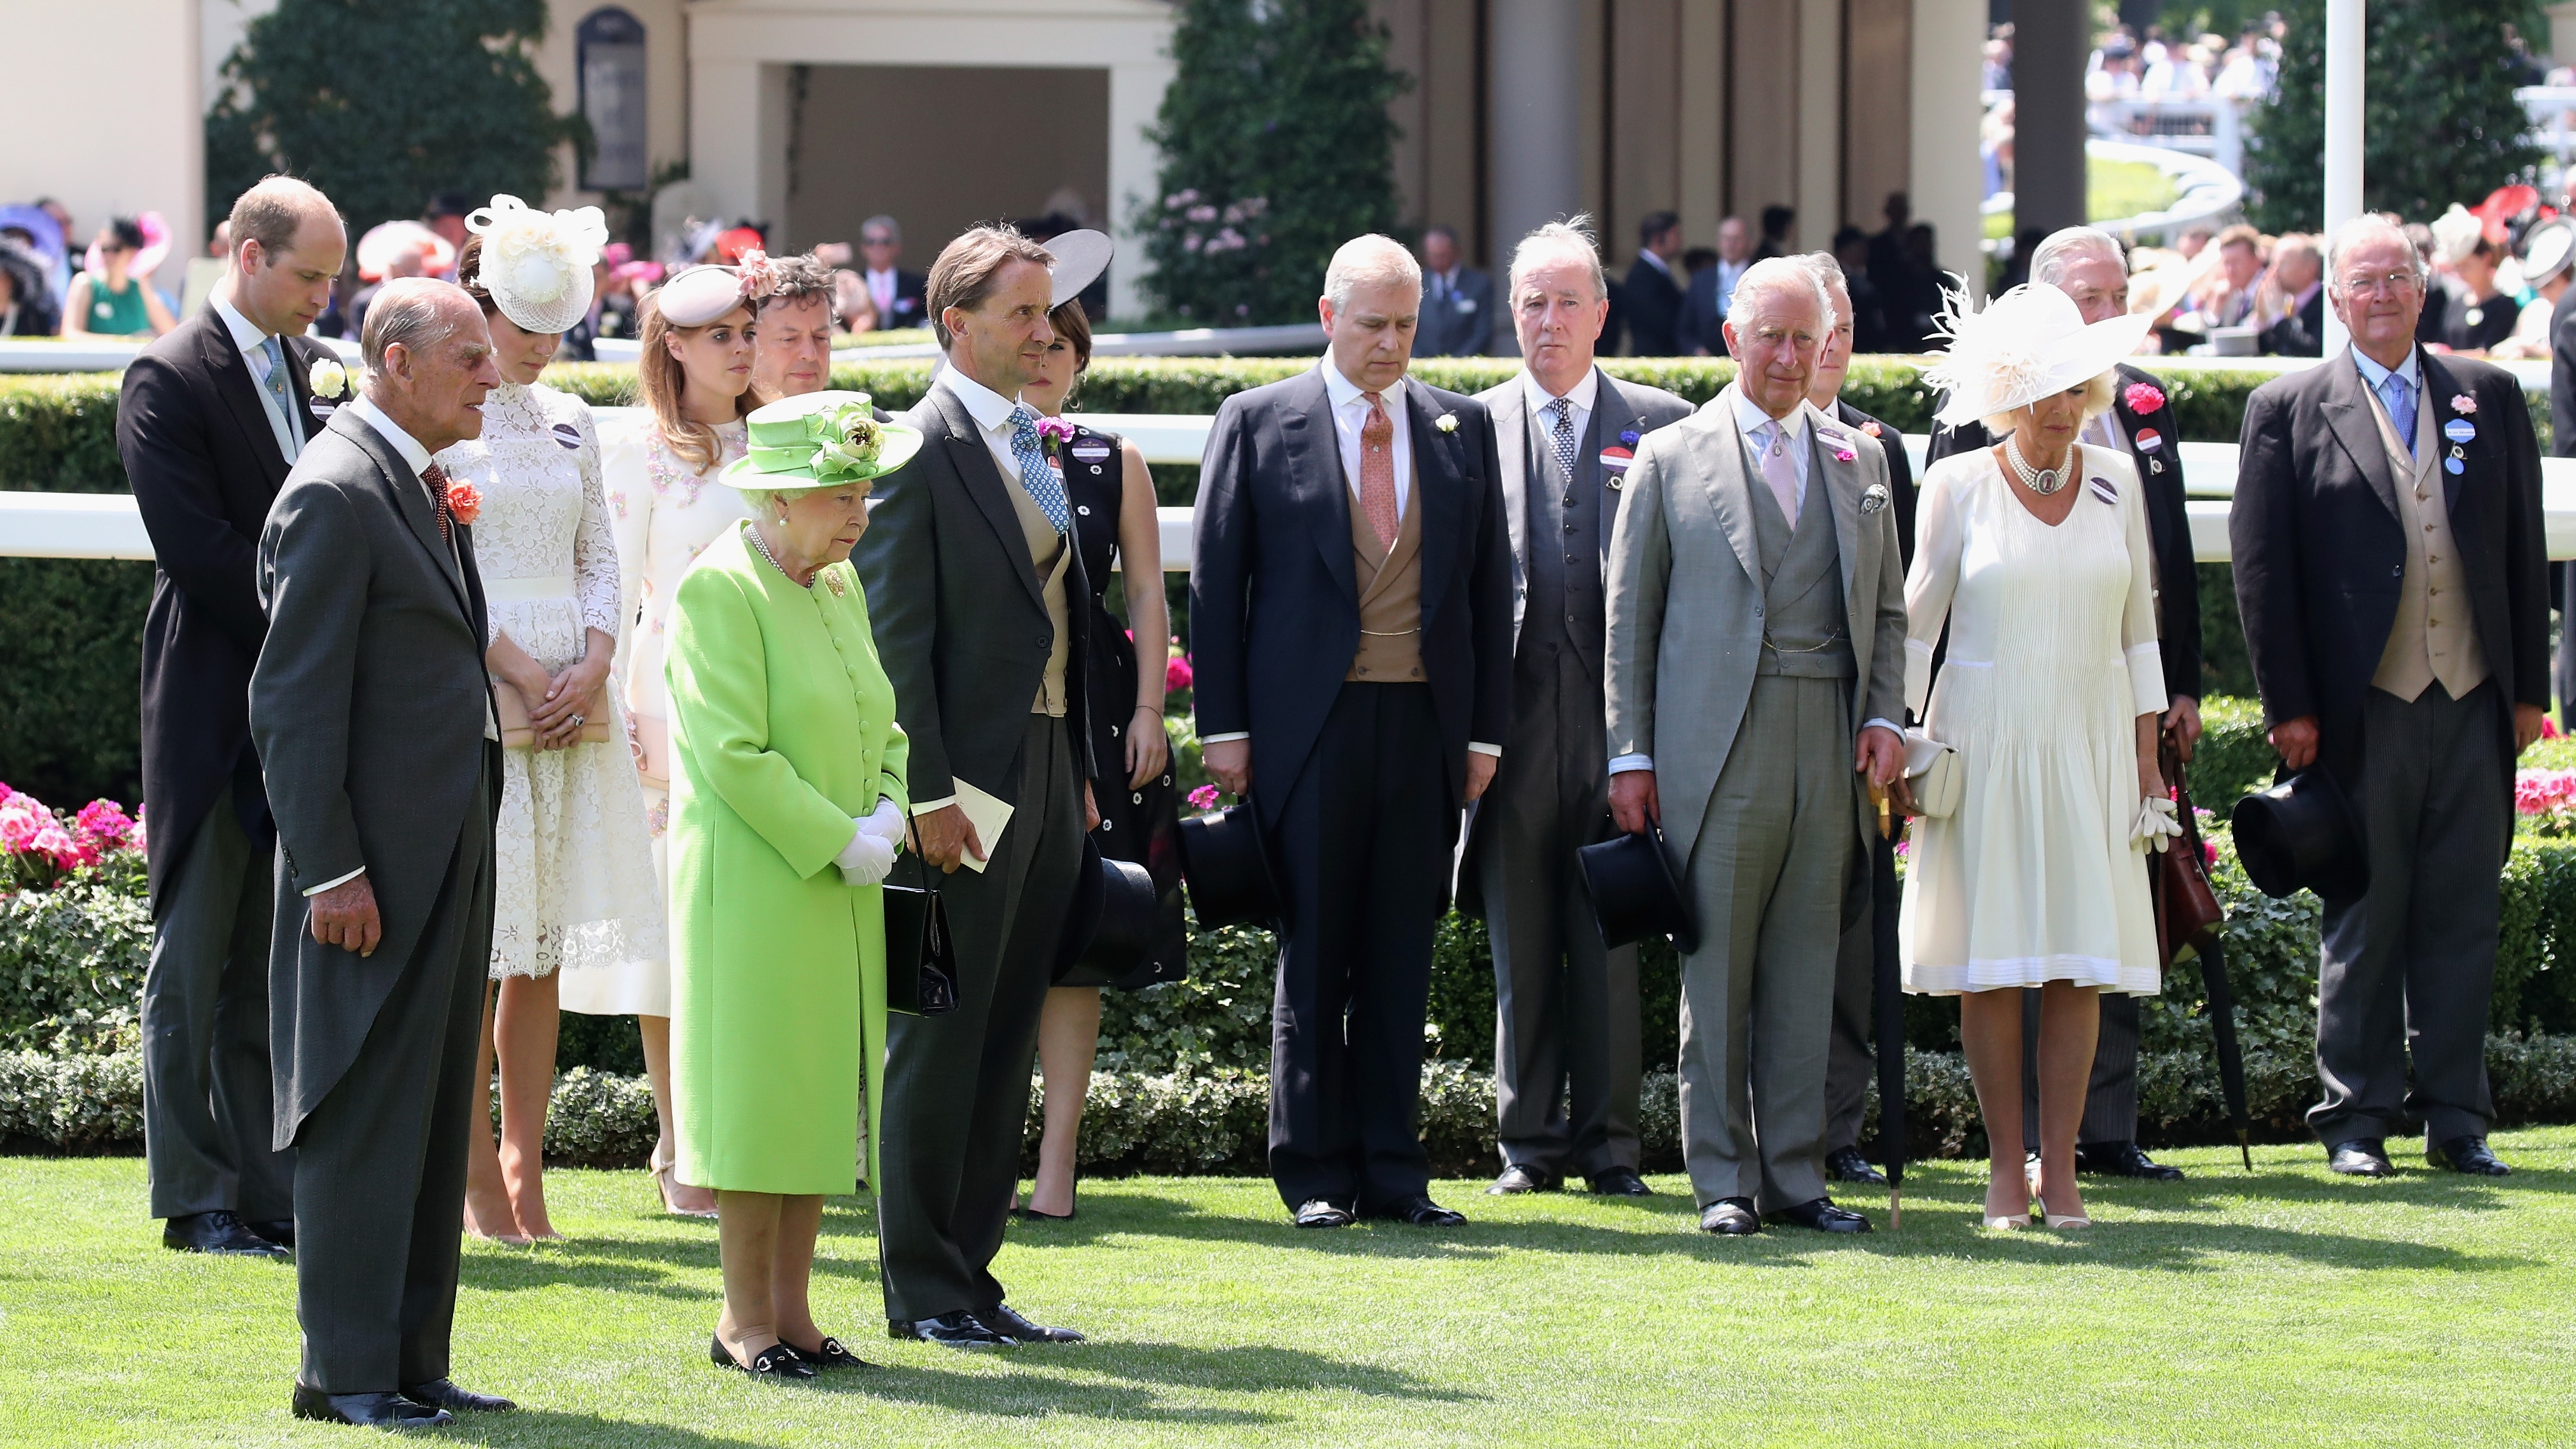 The Royal Family including Queen Elizabeth at Royal Ascot in 2017